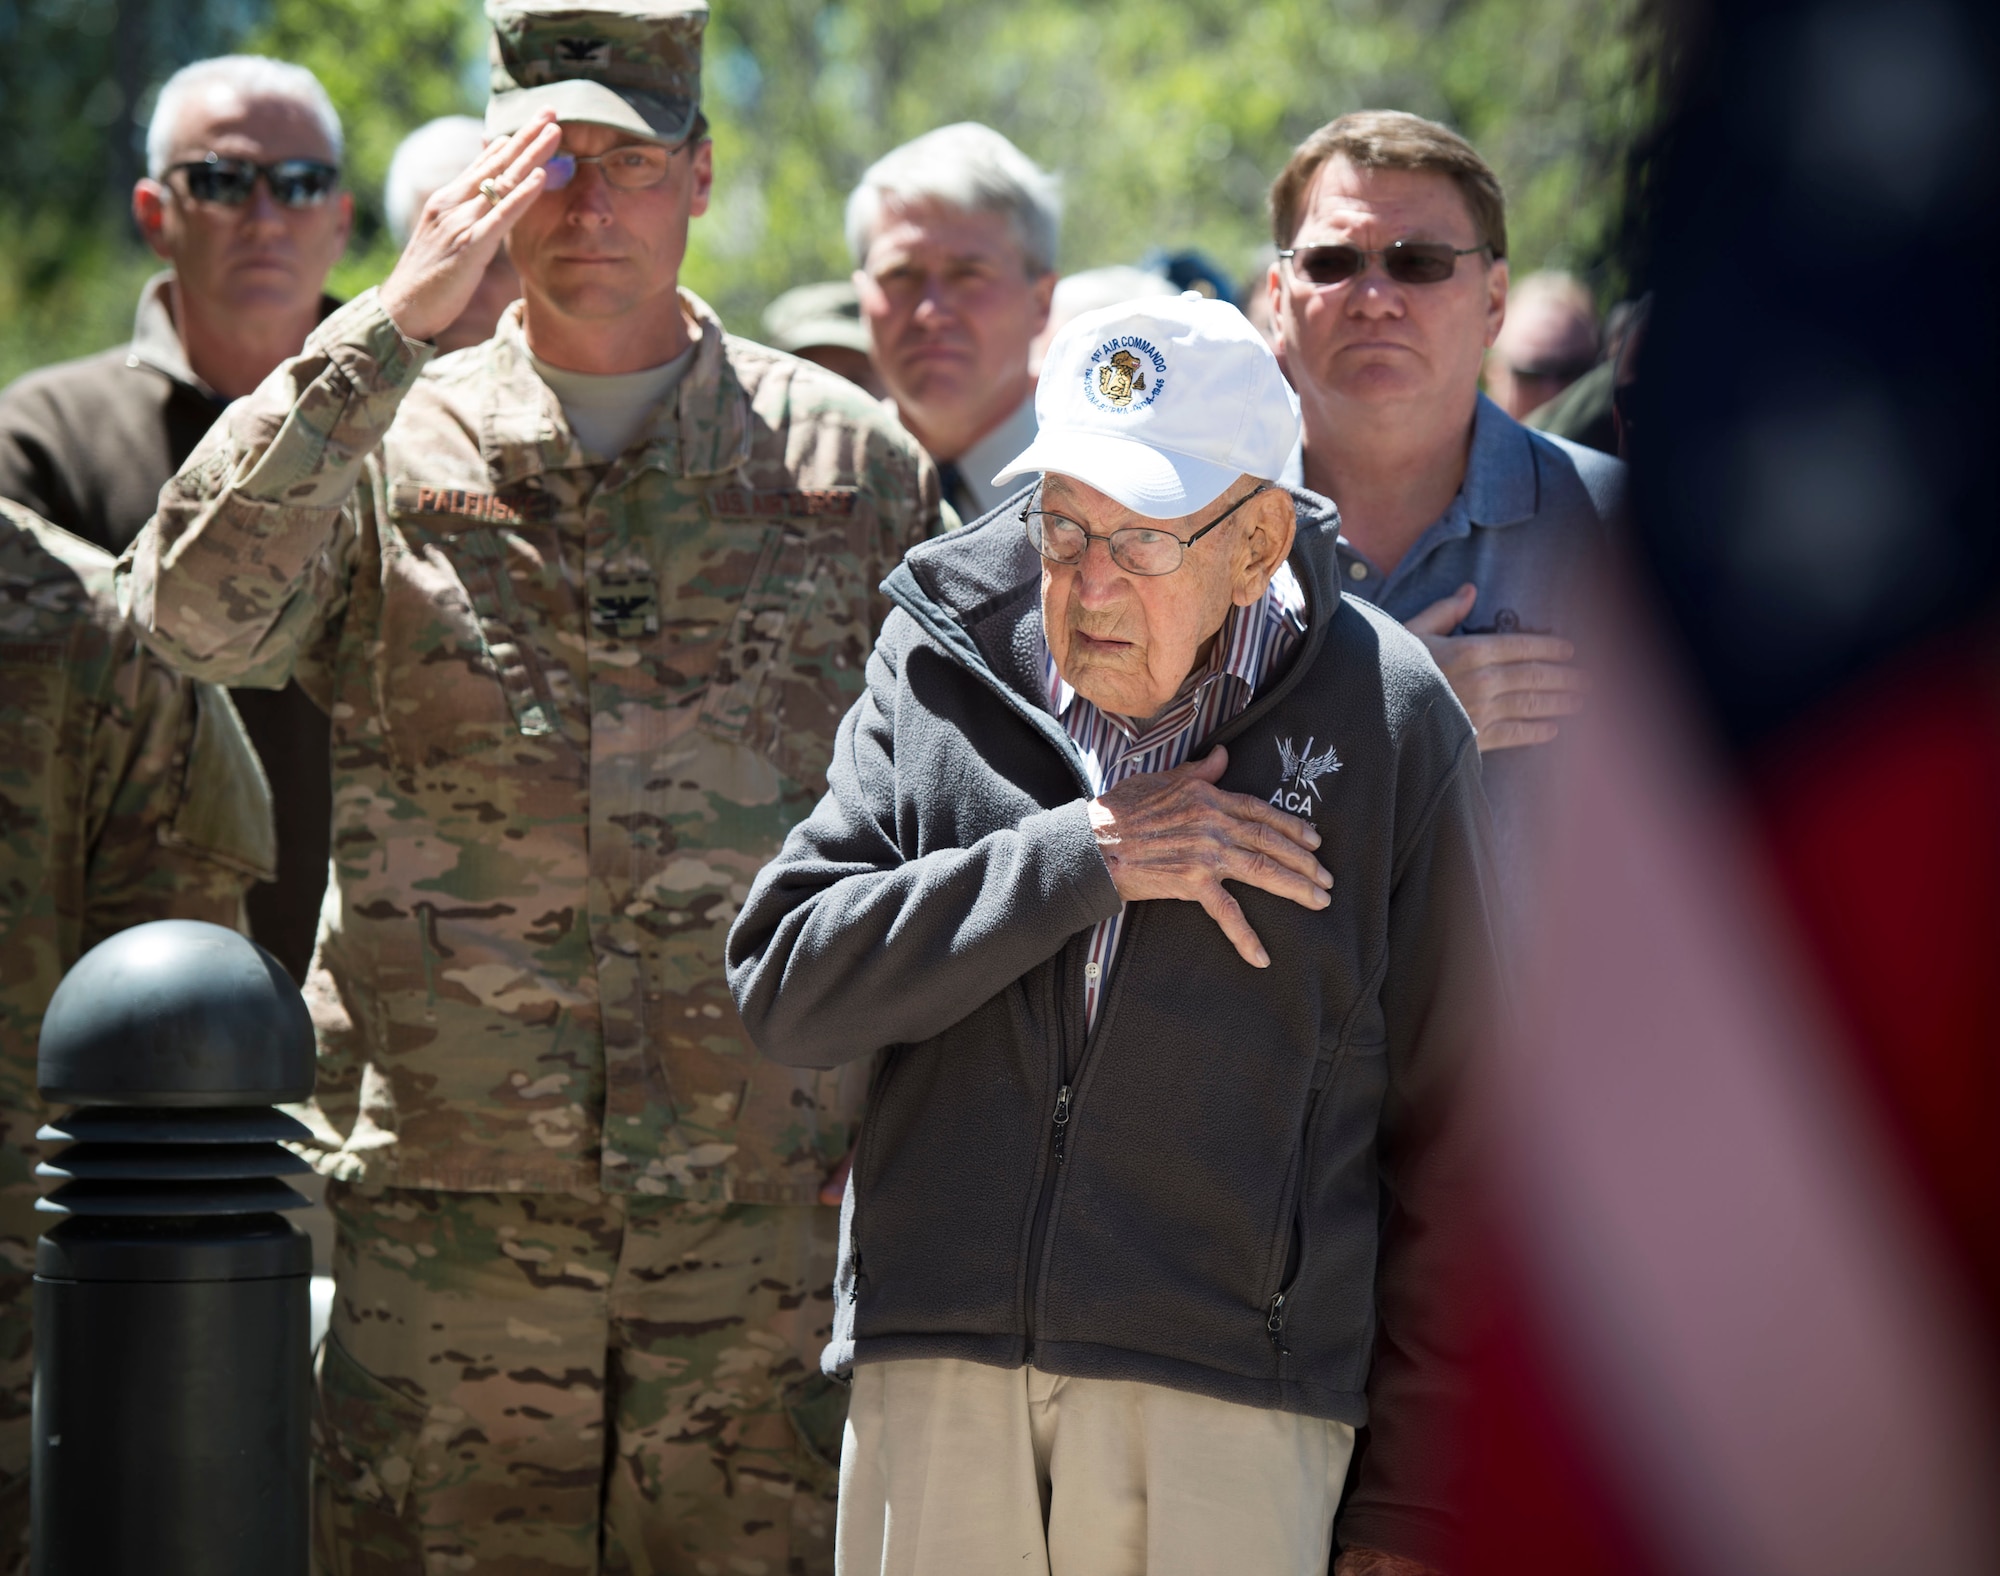 Retired Lt. Col. Richard E. Cole stands for the national anthem during a building renaming and dedication ceremony at Hurlburt Field, Fla., April 7, 2017.  The 319th Special Operations Squadron building was renamed after Cole in honor of his career as an early Air Commando and Doolittle Raider. (U.S. Air Force photo by Senior Airman Krystal M. Garret)